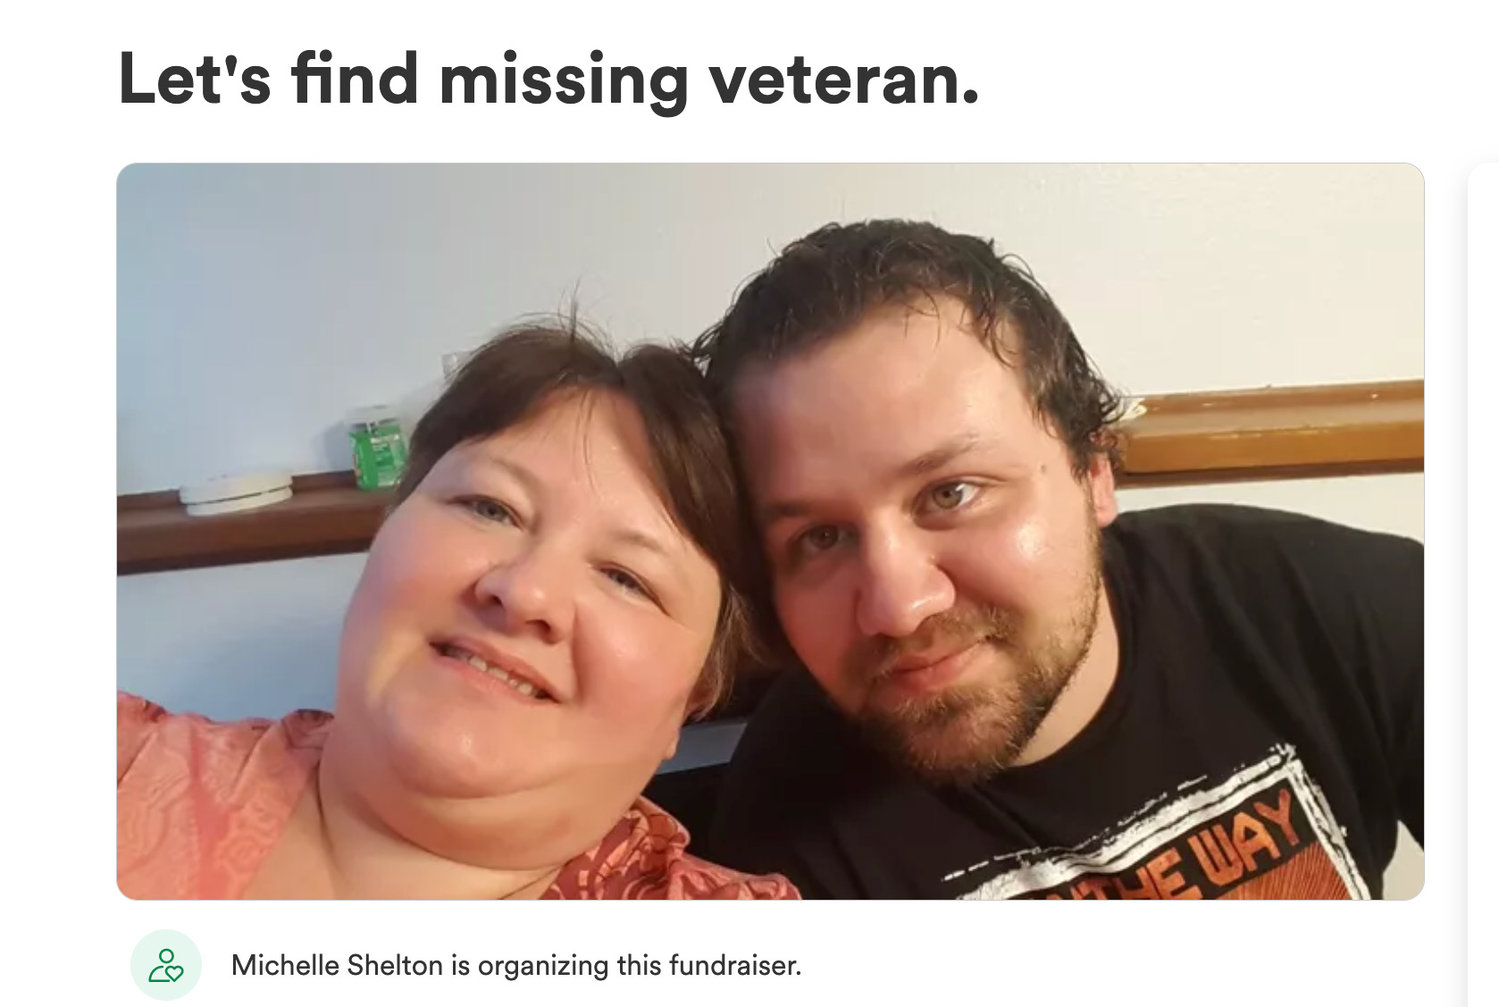 Michelle Shelton, mother of 37-year-old Christopher Golliher, Jr., has opened a GoFundMe page to raise money for a reward for the recovery of her son. Golliher has been missing since February 2022.